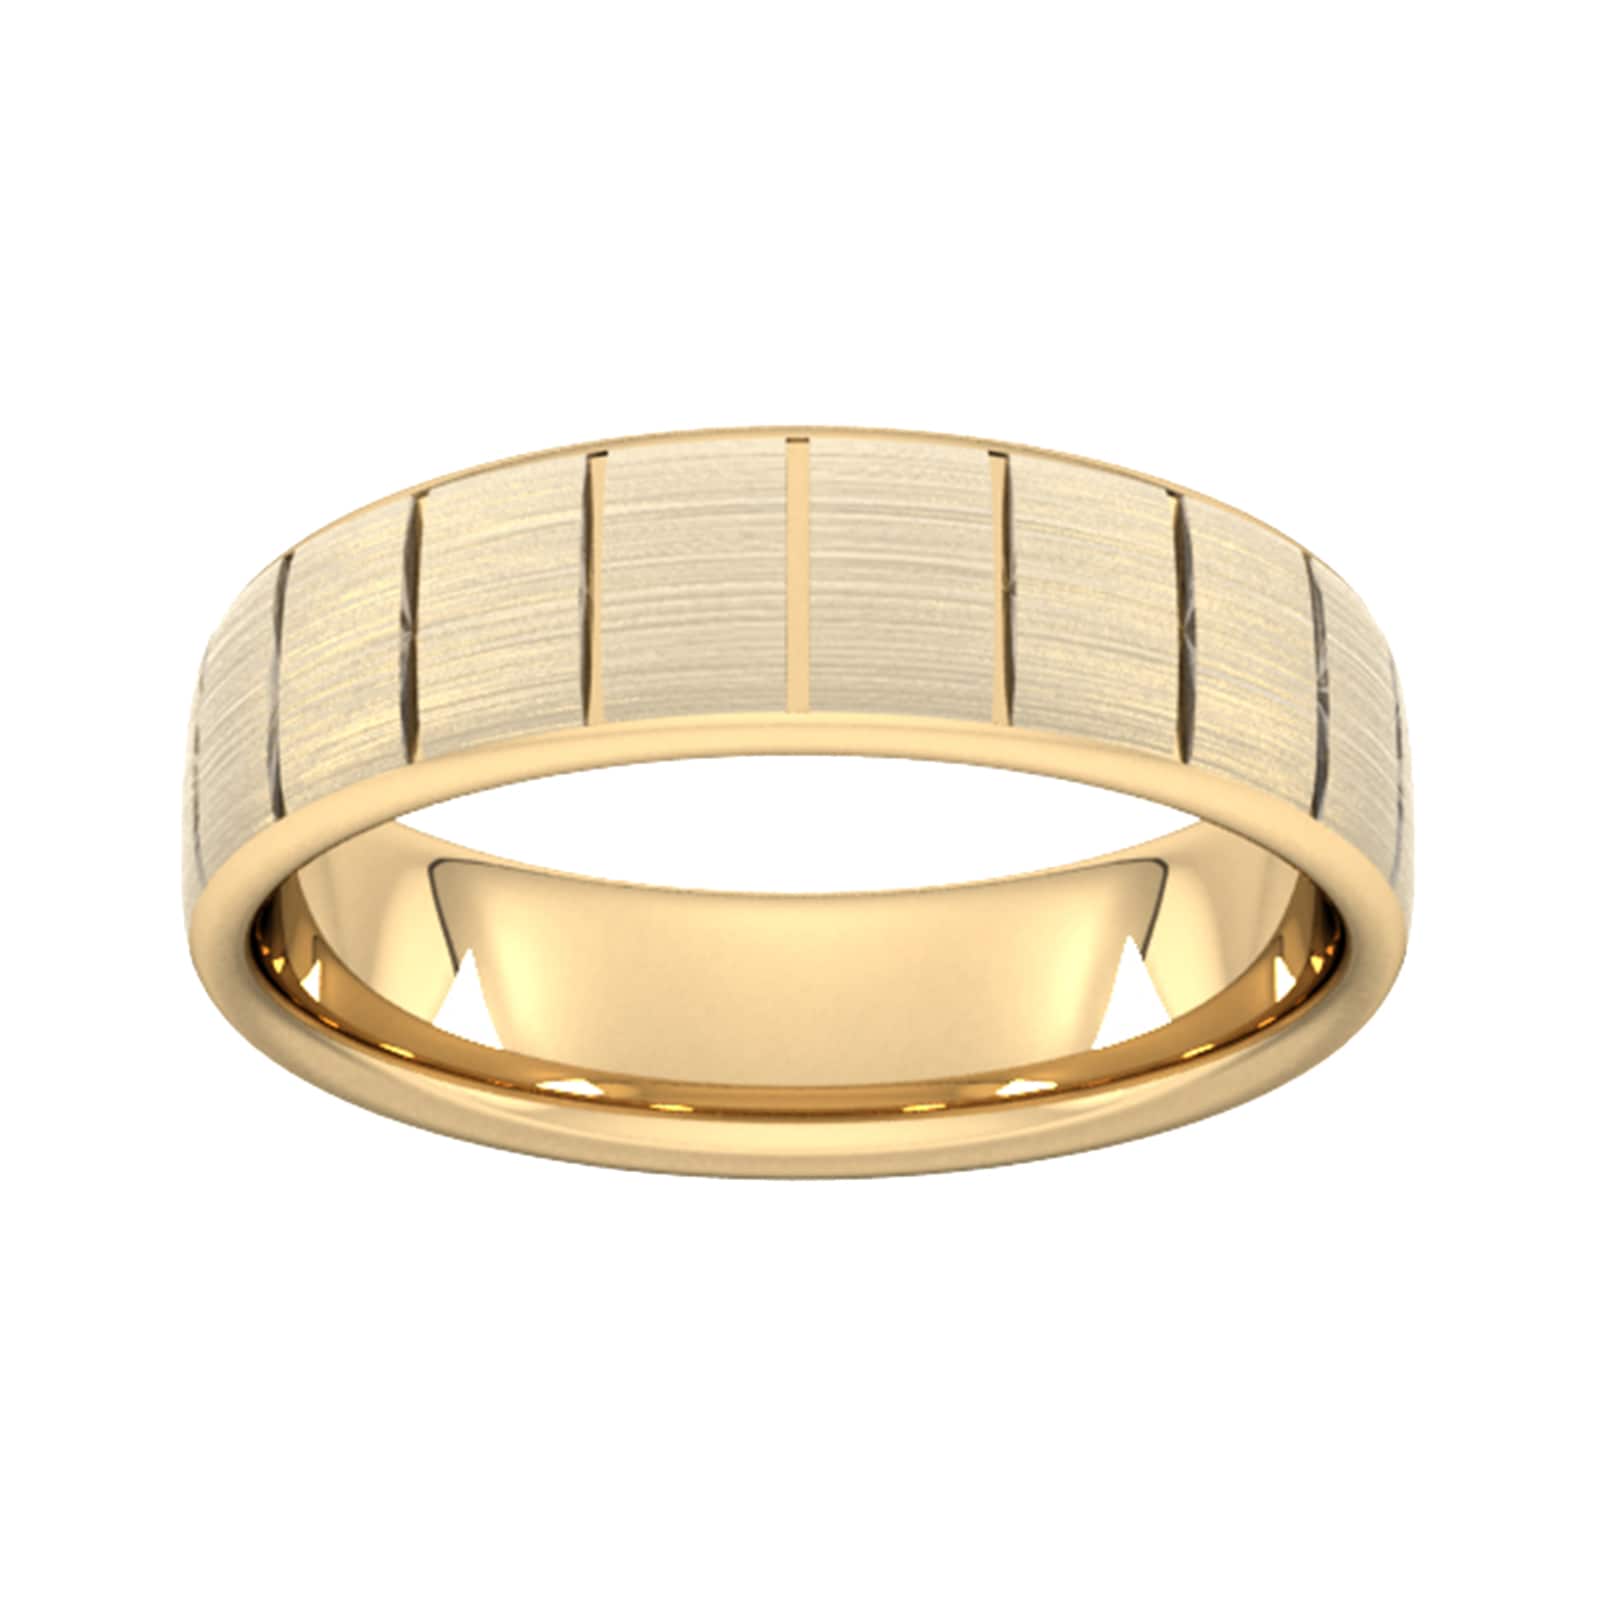 6mm Slight Court Extra Heavy Vertical Lines Wedding Ring In 9 Carat Yellow Gold - Ring Size M